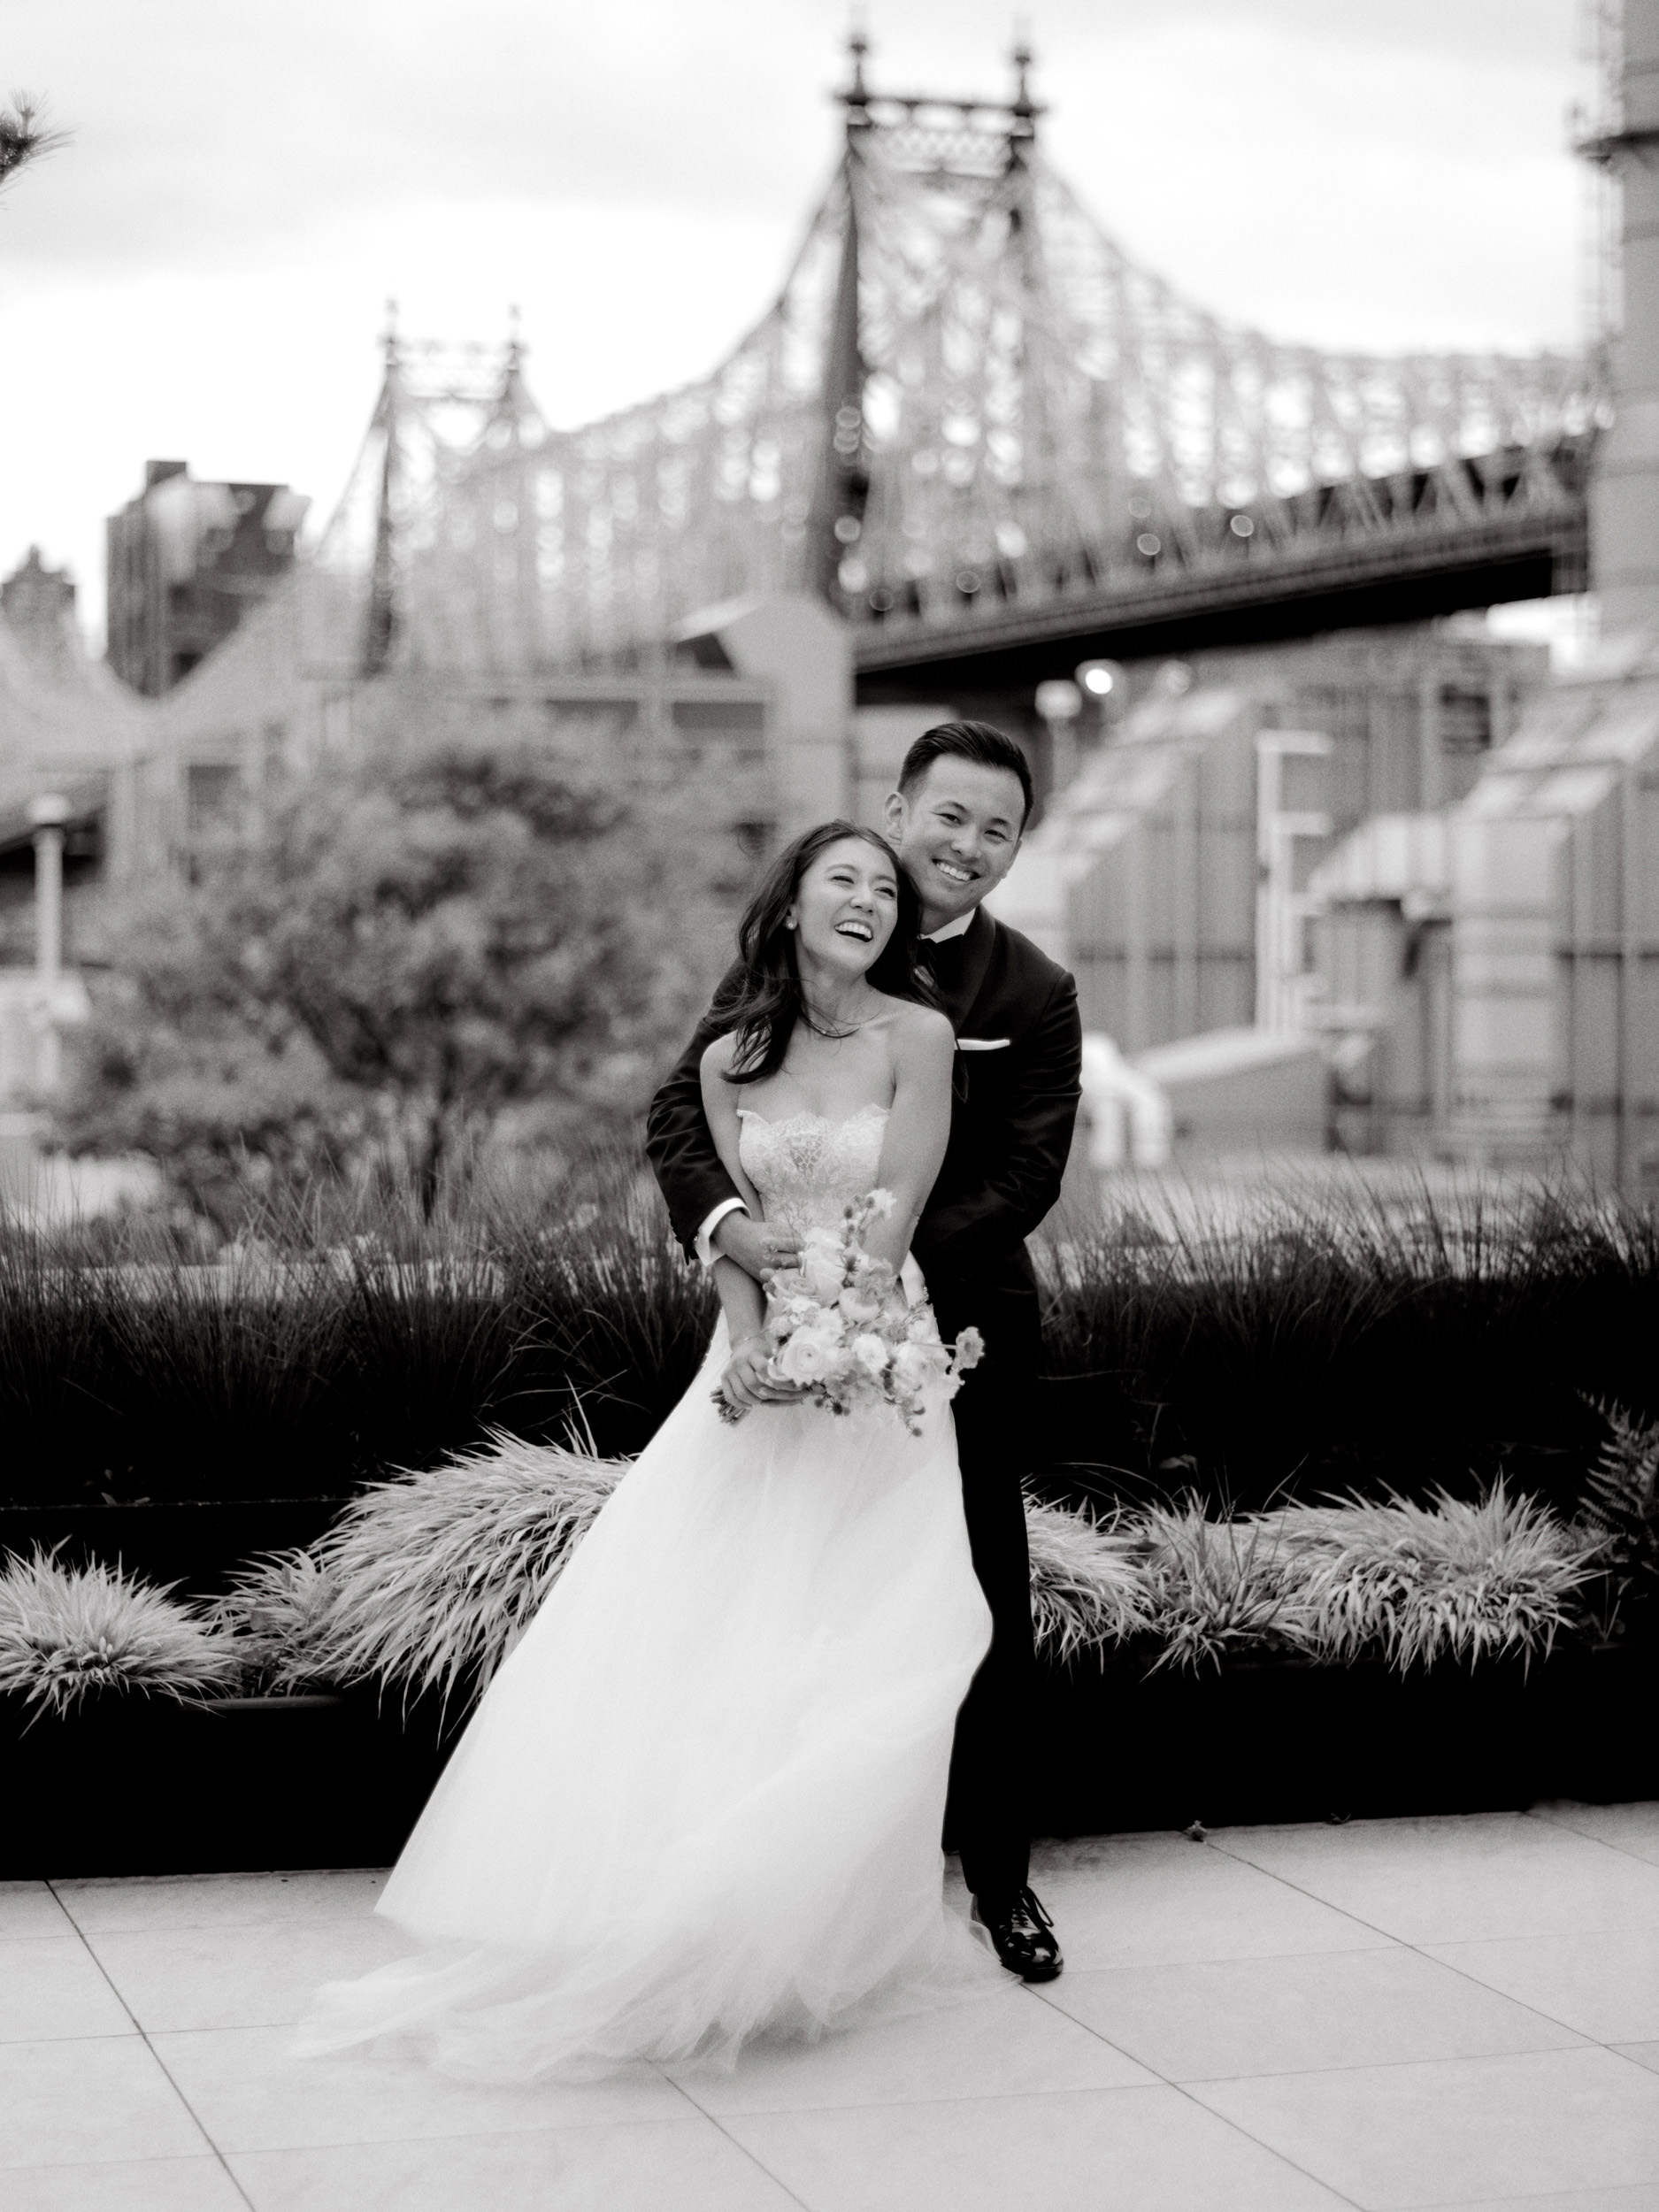 The bride and the groom are smiling happily with the brooklyn bridge on the background. Photojournalistic image by Jenny Fu Studio